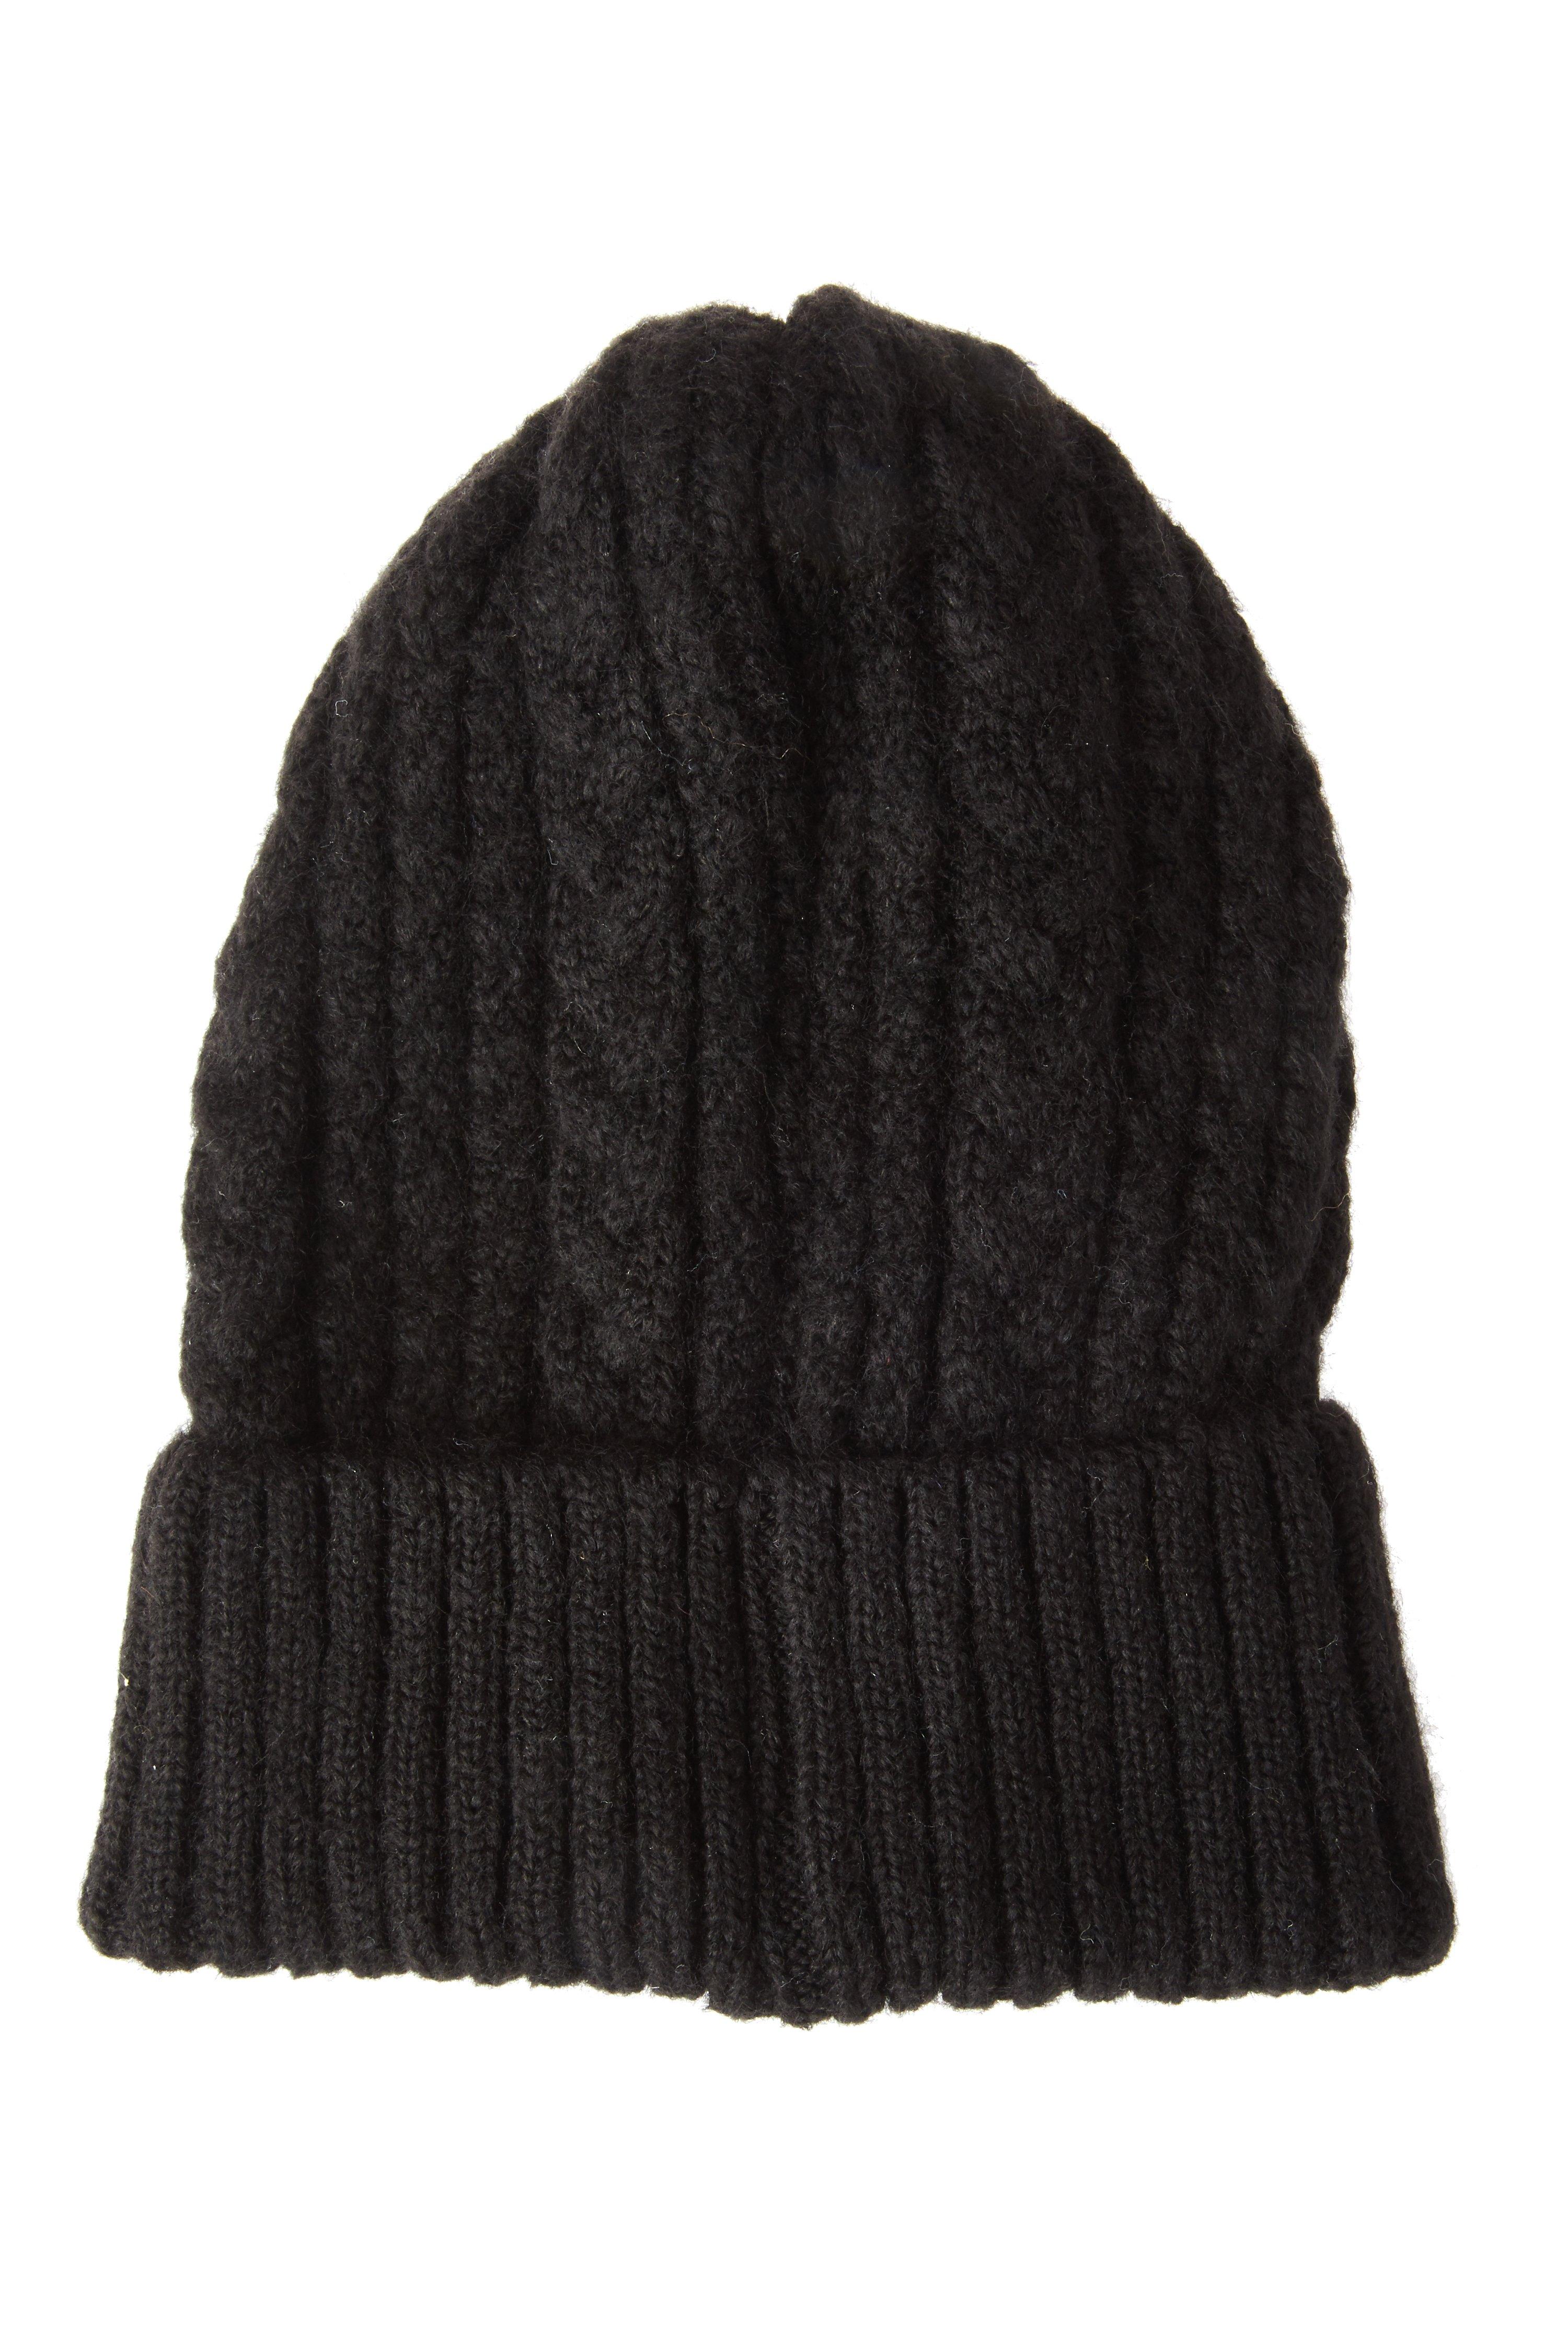 Black Knitted Hat - Quiz Clothing